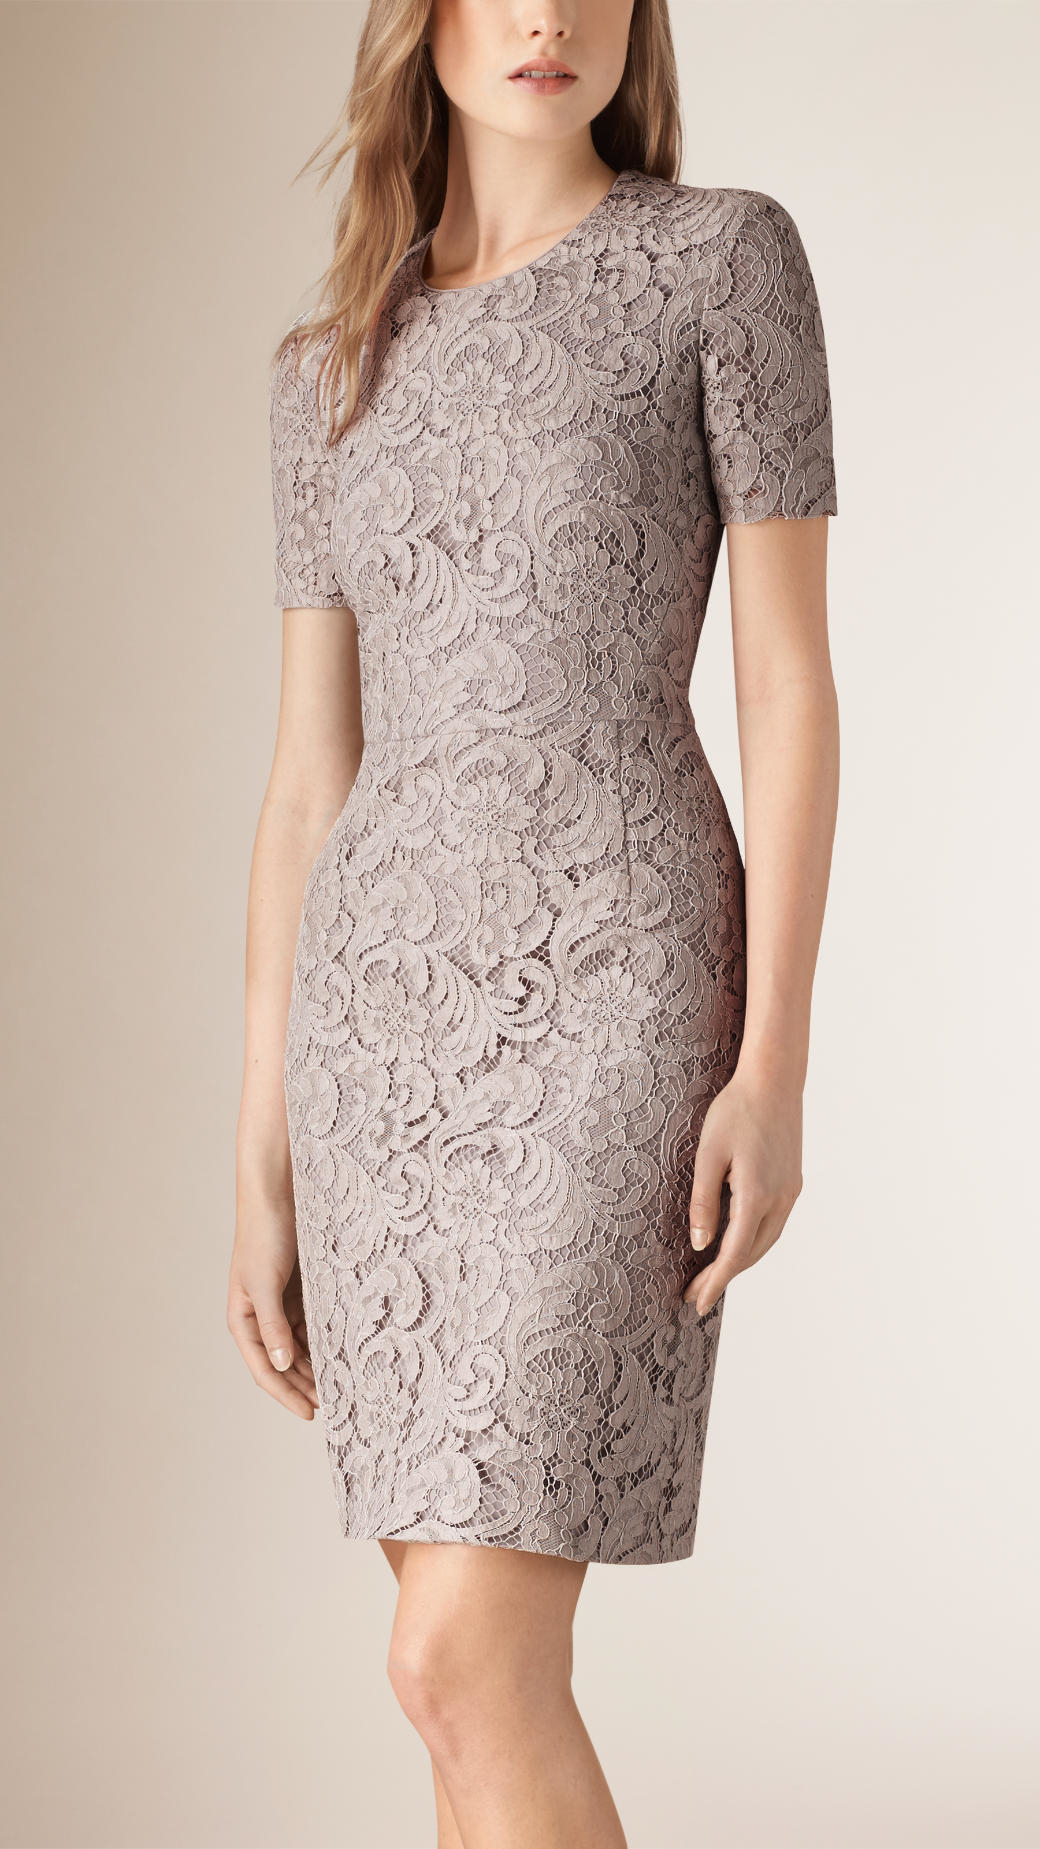 French Lace Shift Dress in Pale Grey 